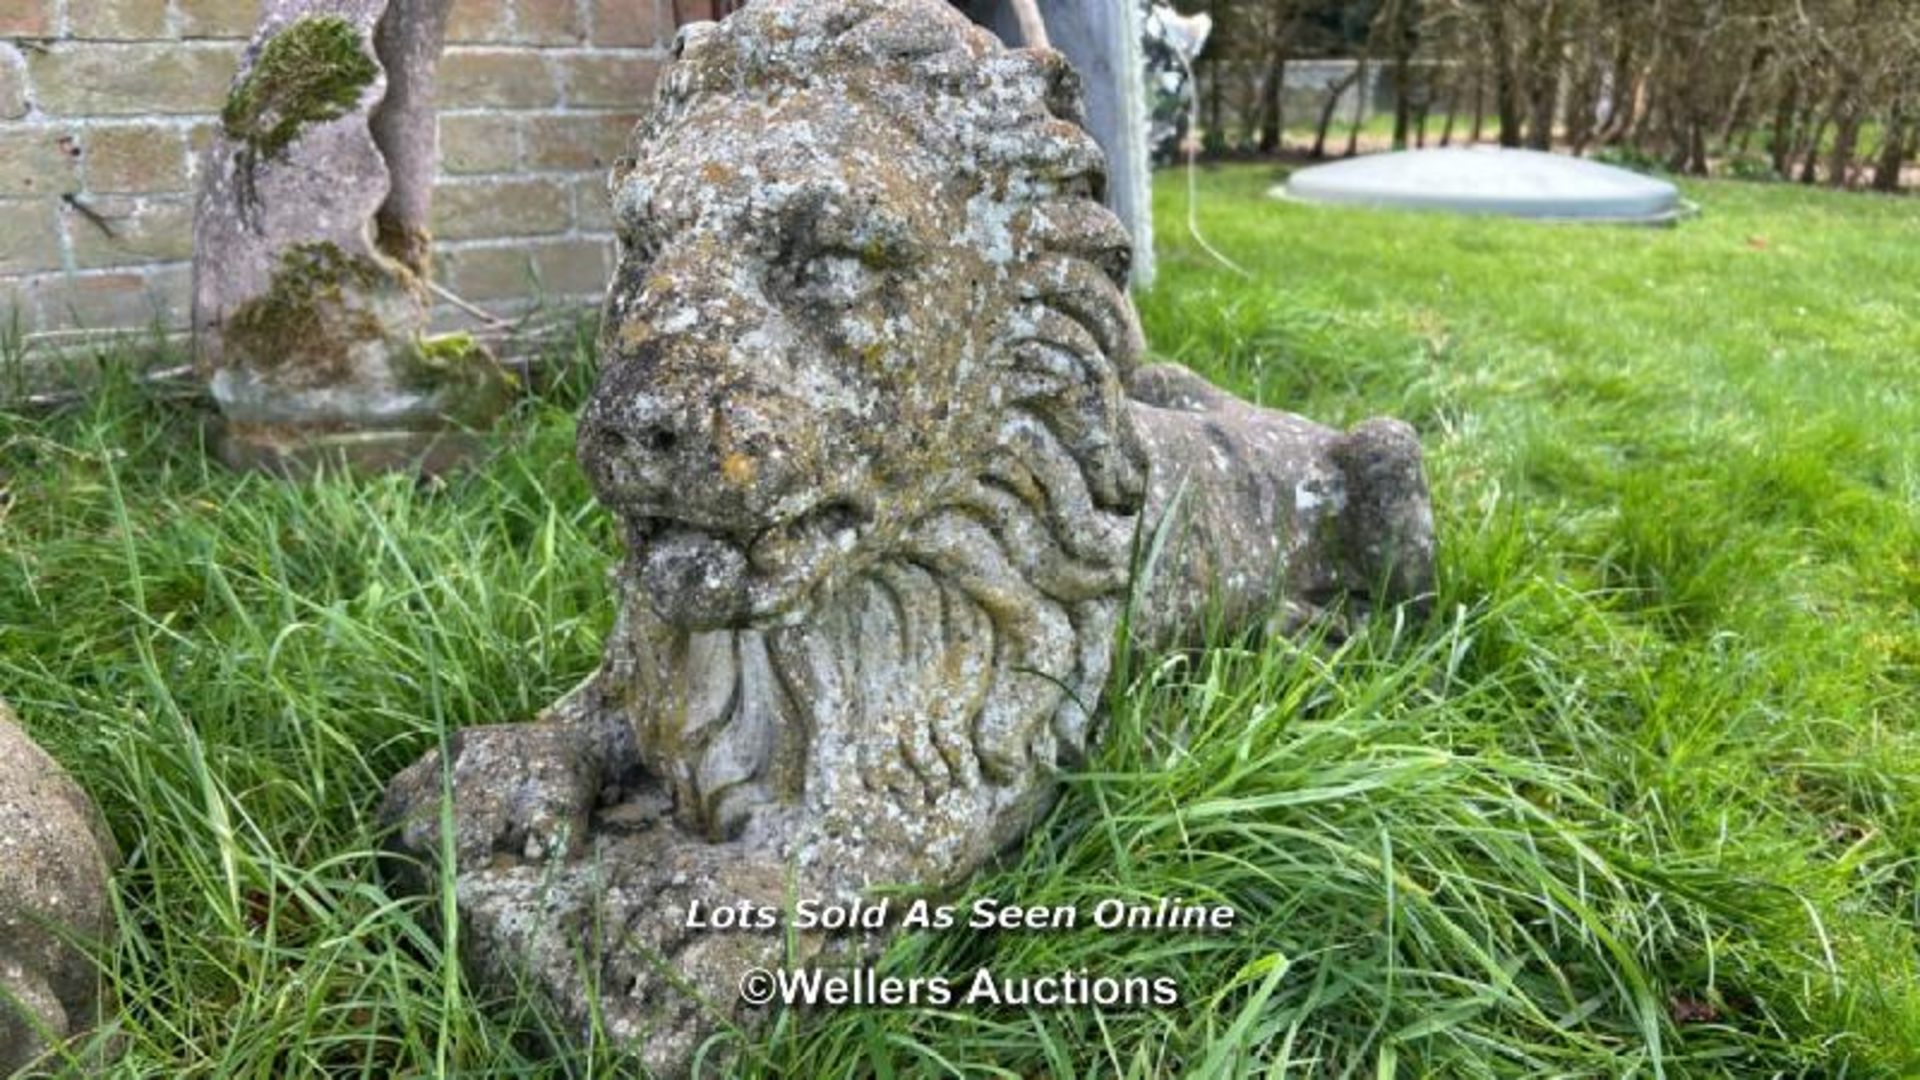 PAIR OF COMPOSITION RECUMBENT LION STATUES, WEATHERED, 70 X 30 X 50CM - Image 2 of 5